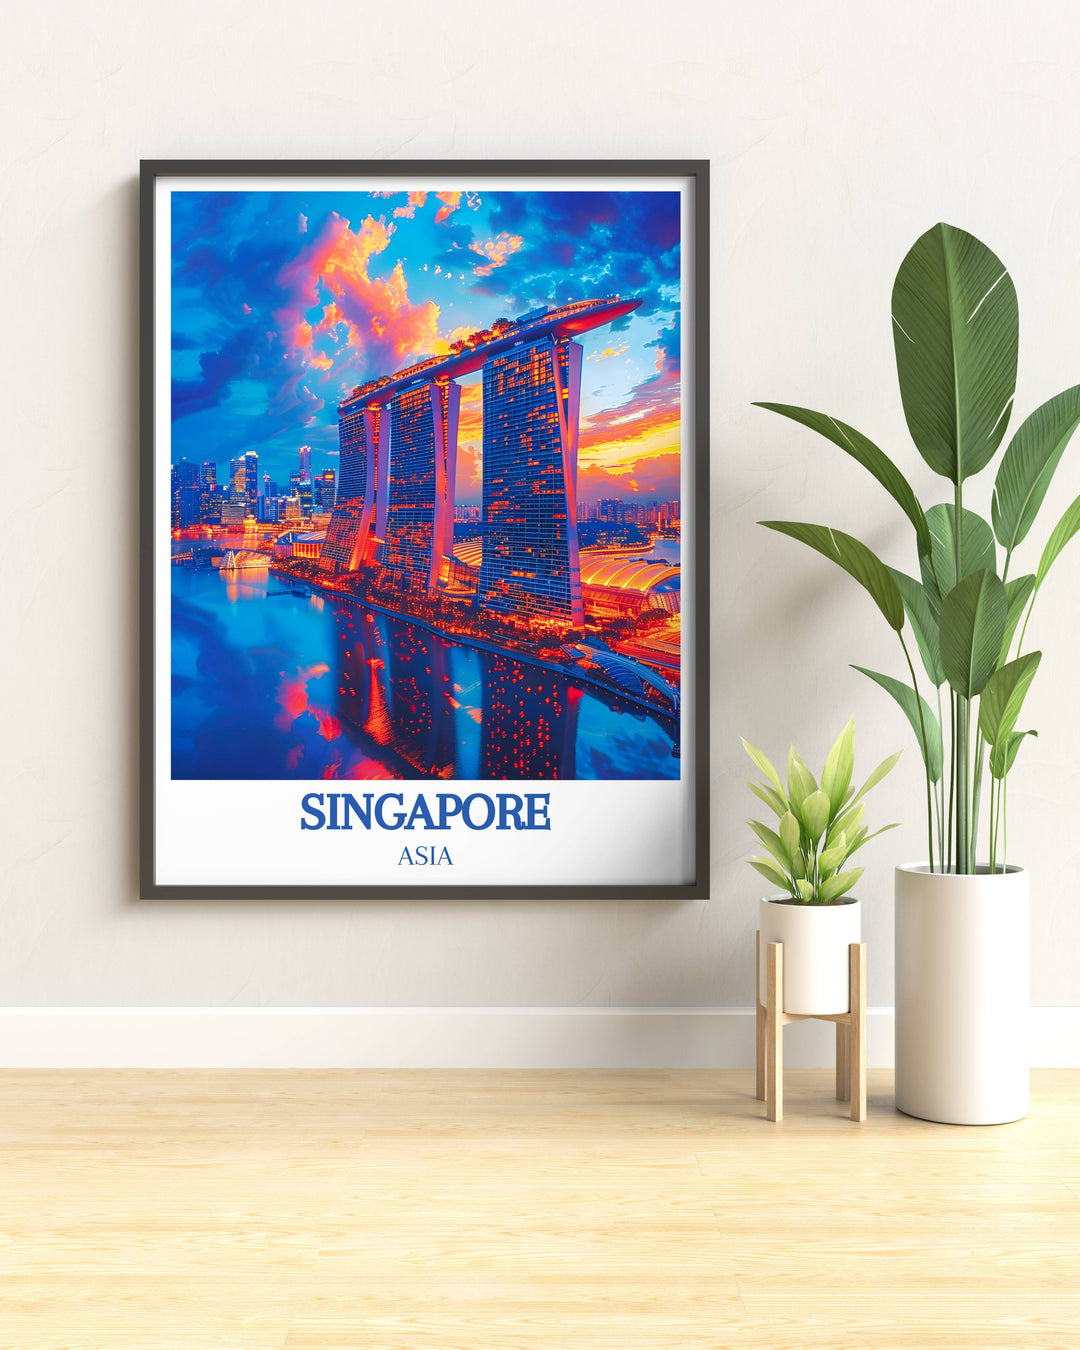 Celebrate Singapores innovation with our Asia Vintage Posters, featuring Marina Bay Sands in a nostalgic style that blends history and modernity.